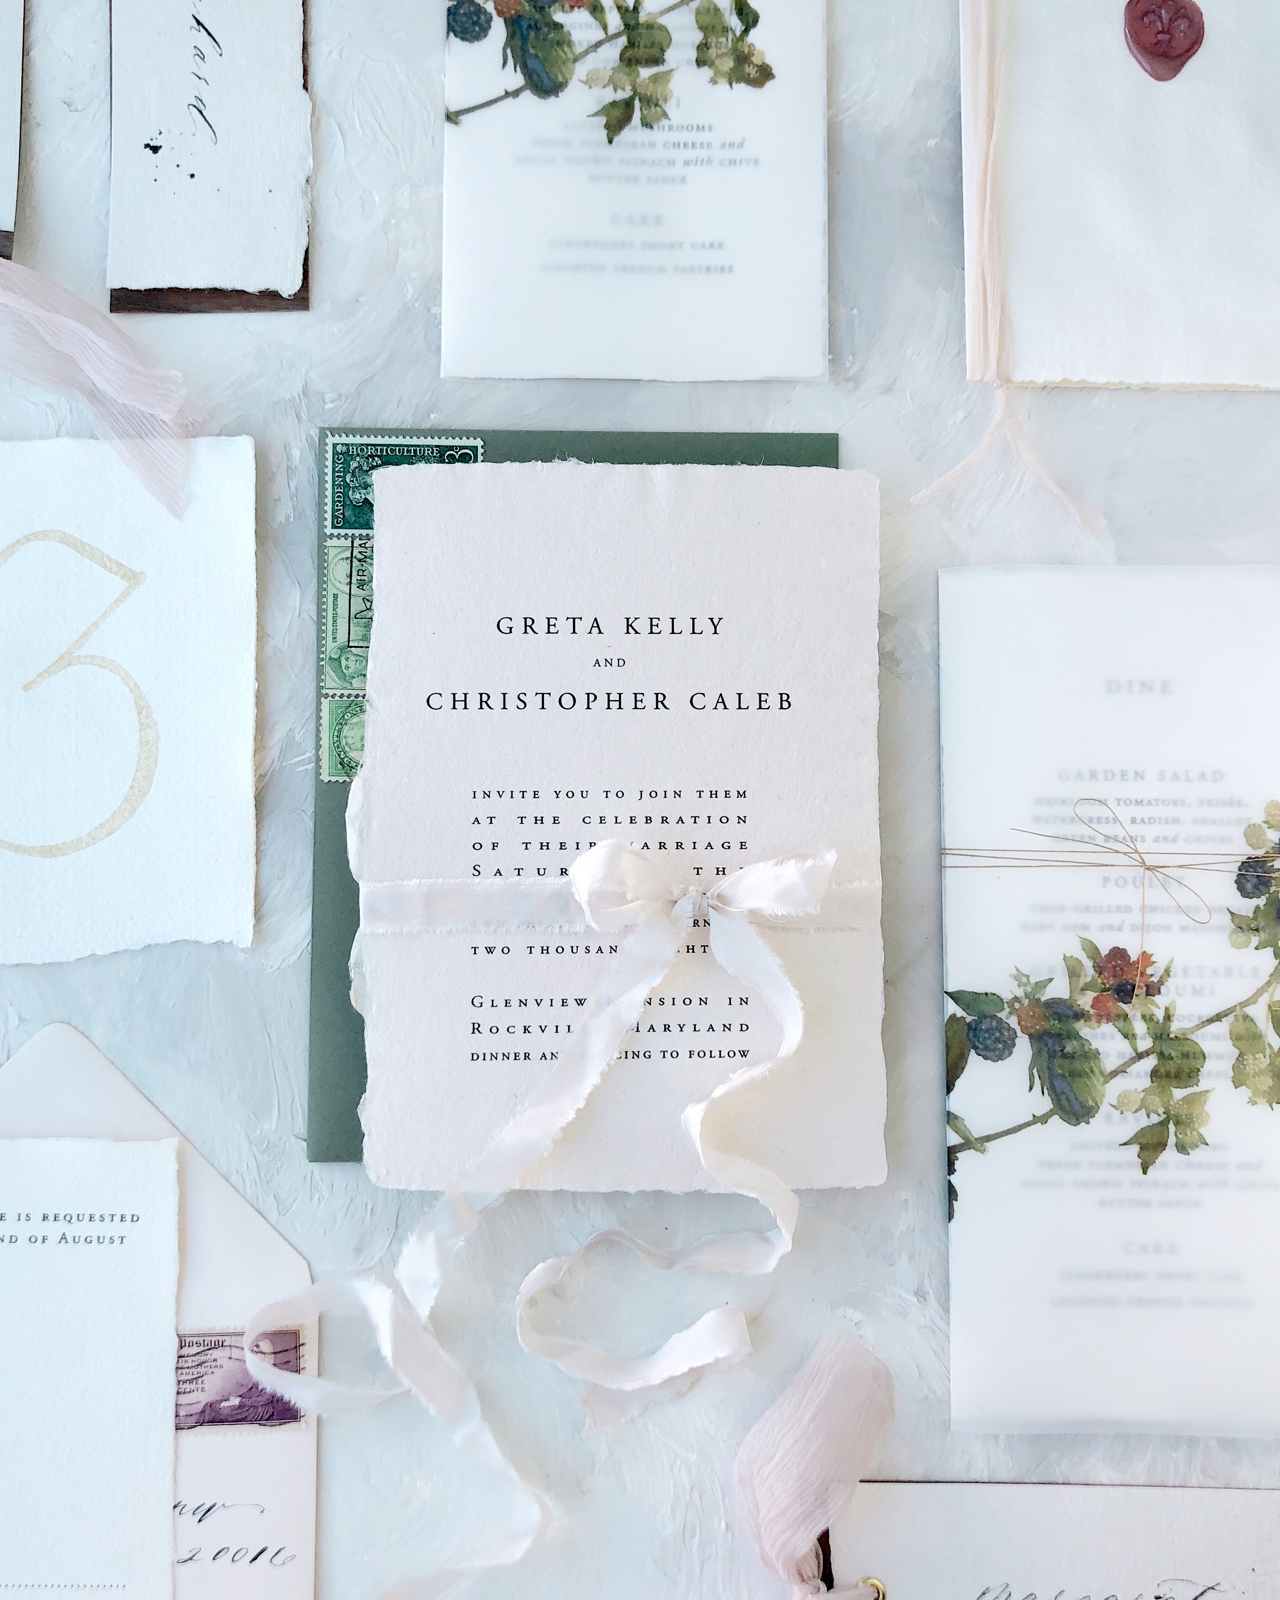 Minimalist Type-Driven Wedding Invitations on Handmade Paper by Every Little Letter